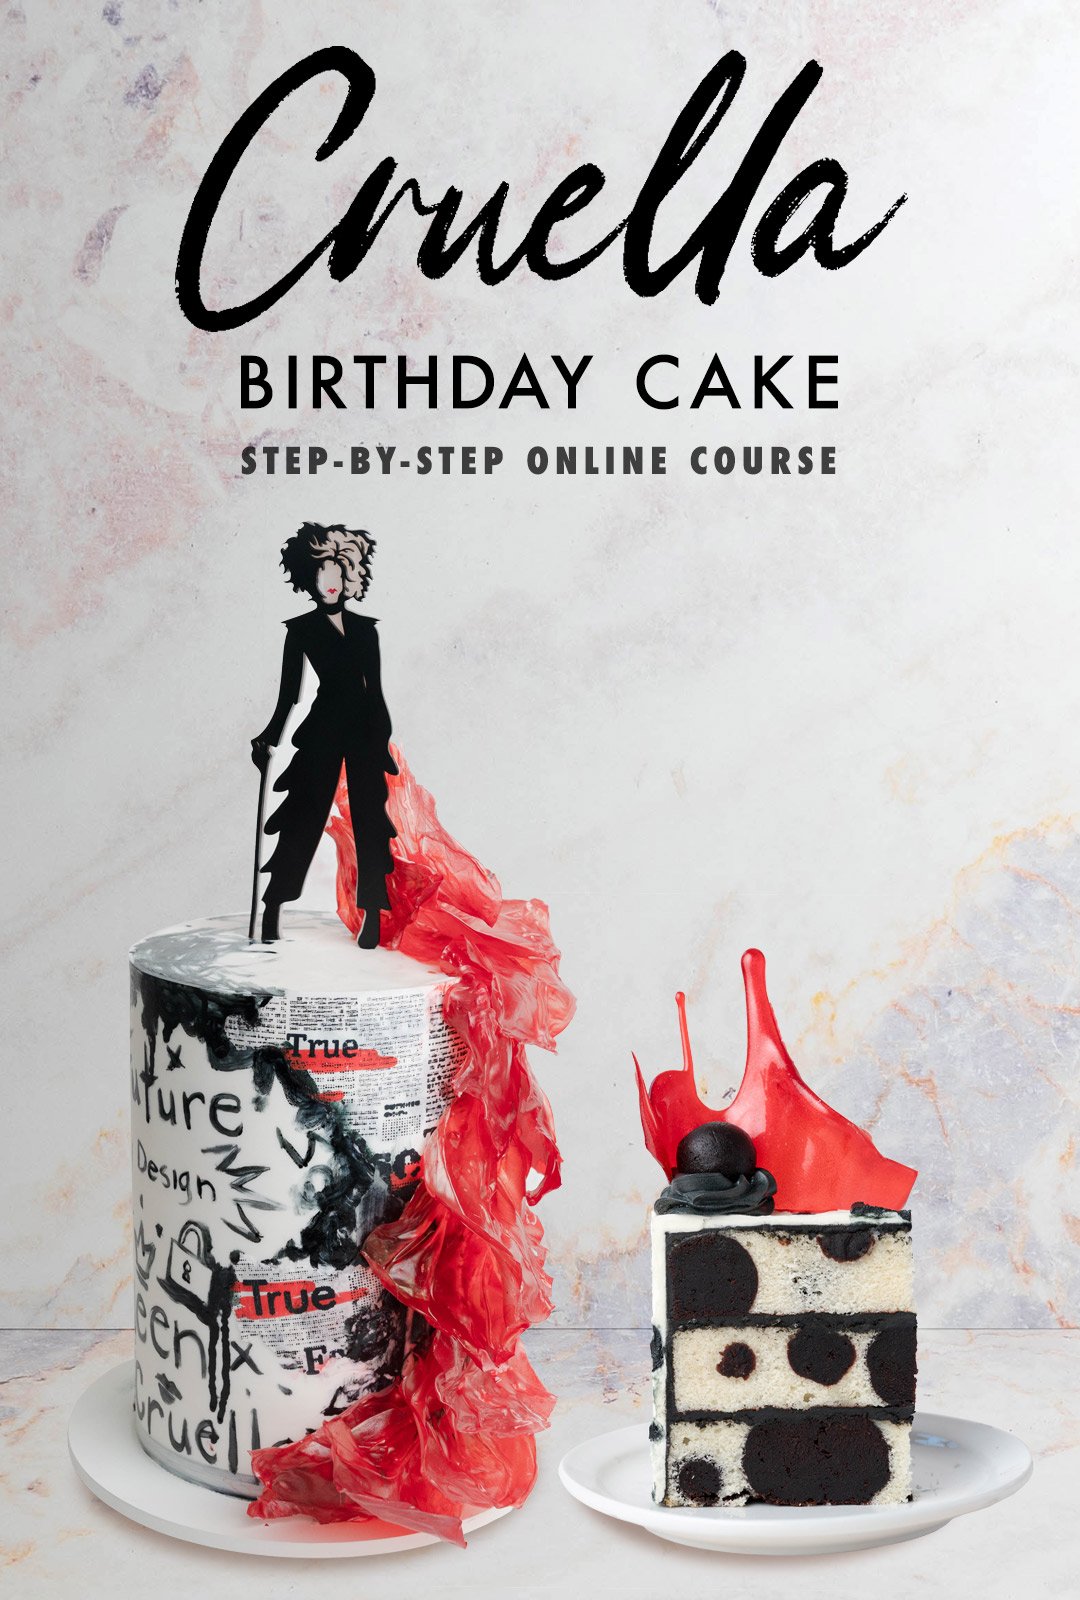 Cake decorated with an edible red dress, newsprint graffiti and hand painted details to look like Cruella movie